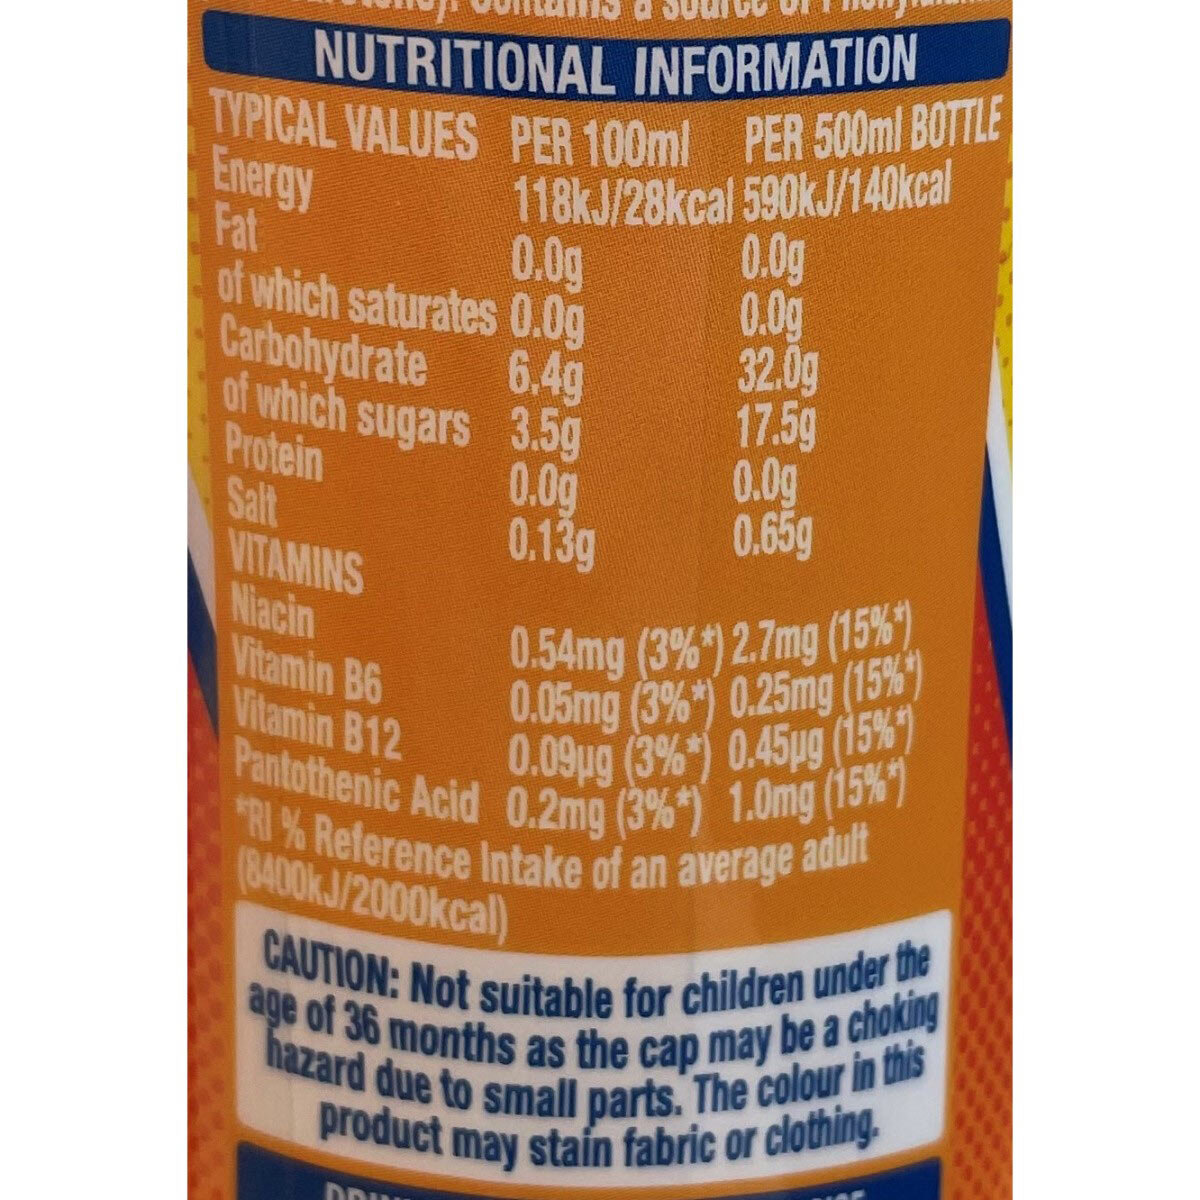 Close up image of nutritional information